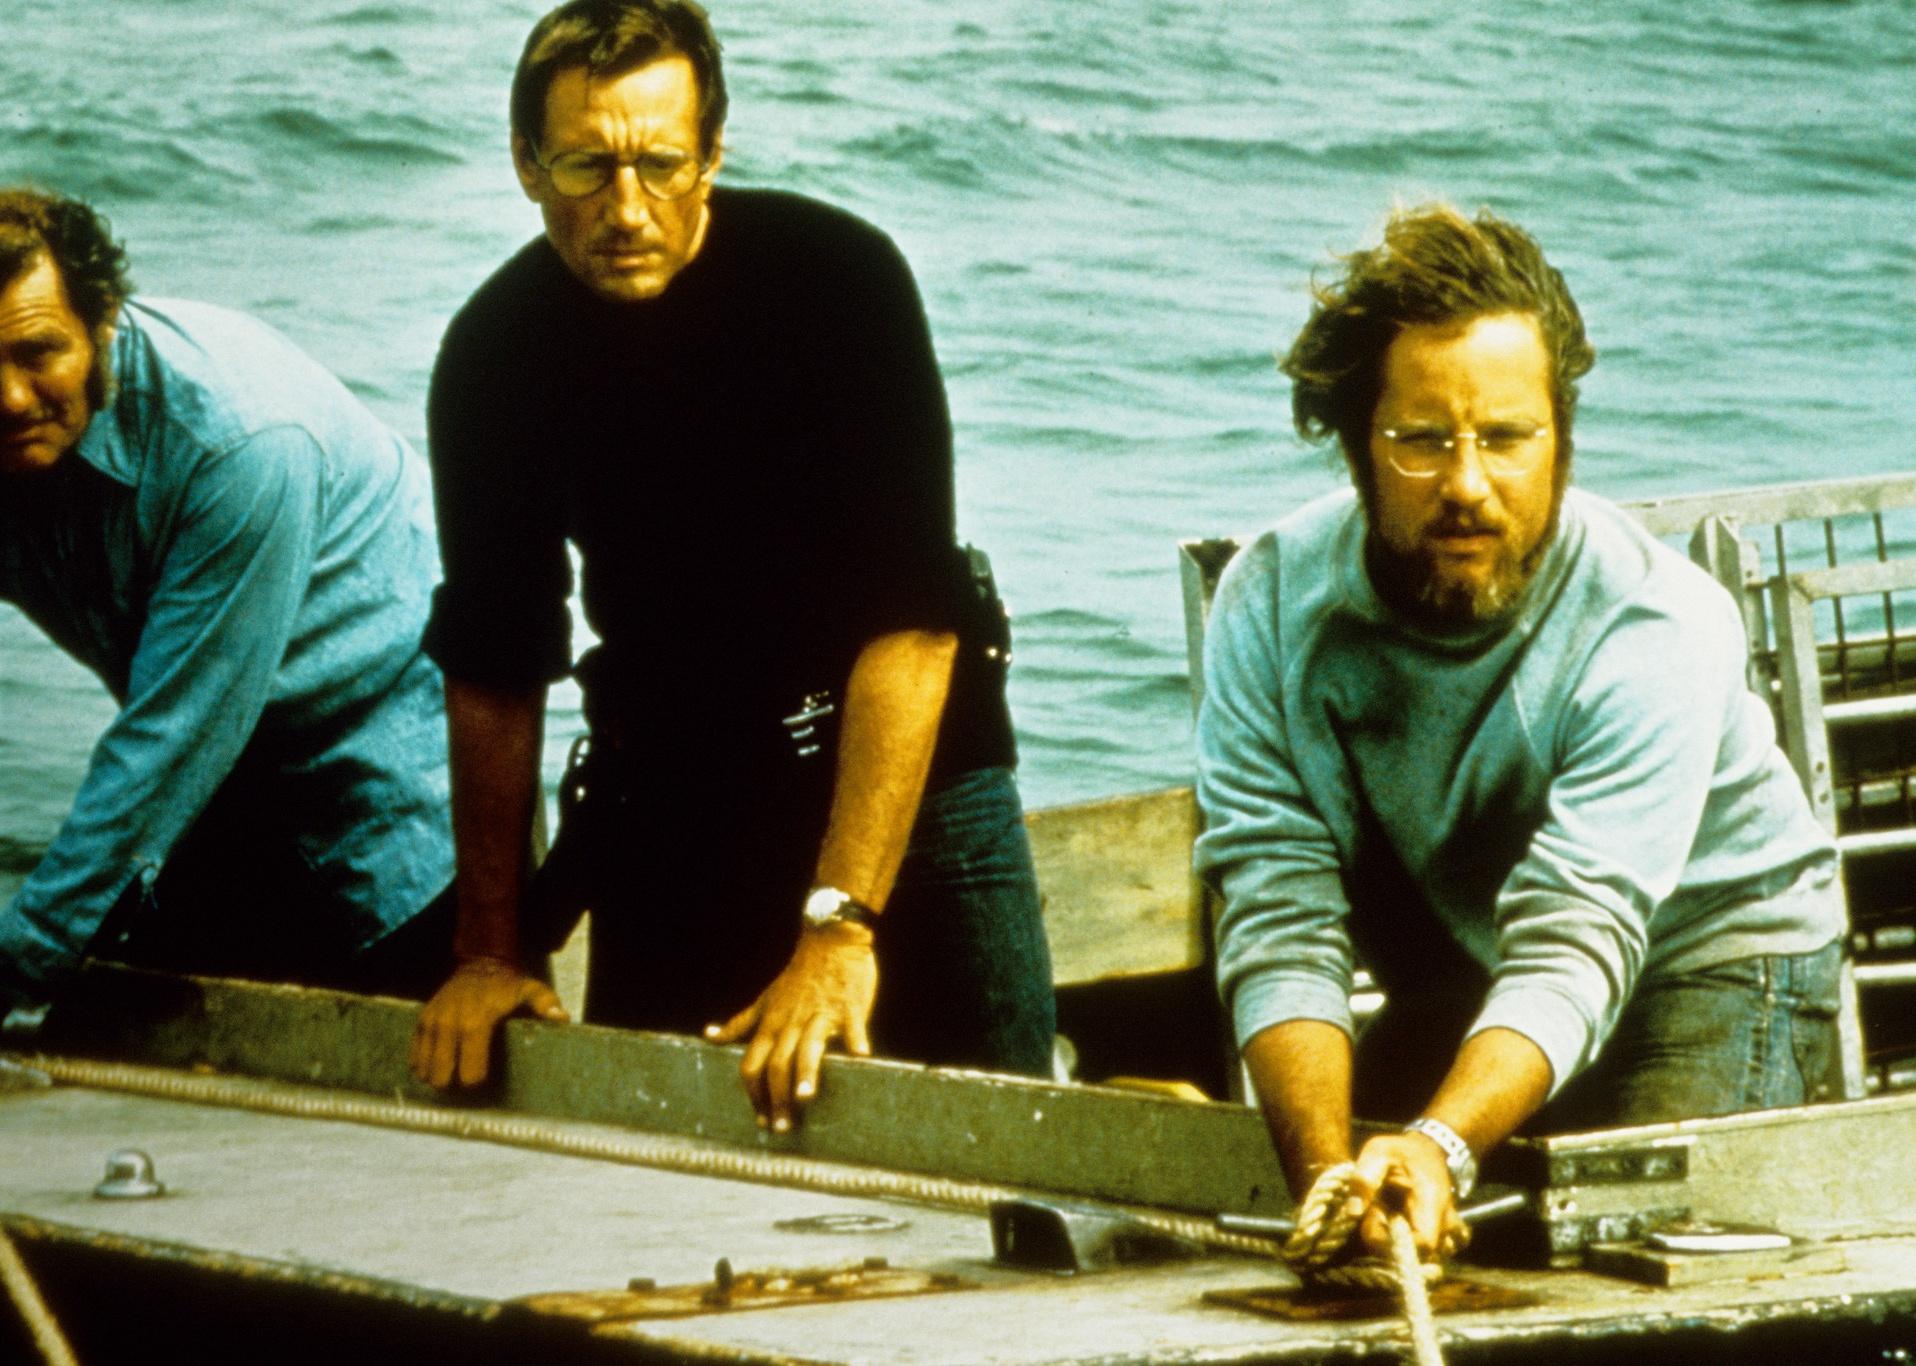 Richard Dreyfuss, Roy Scheider, and Robert Shaw stand on a boat looking terrified at something in the water.